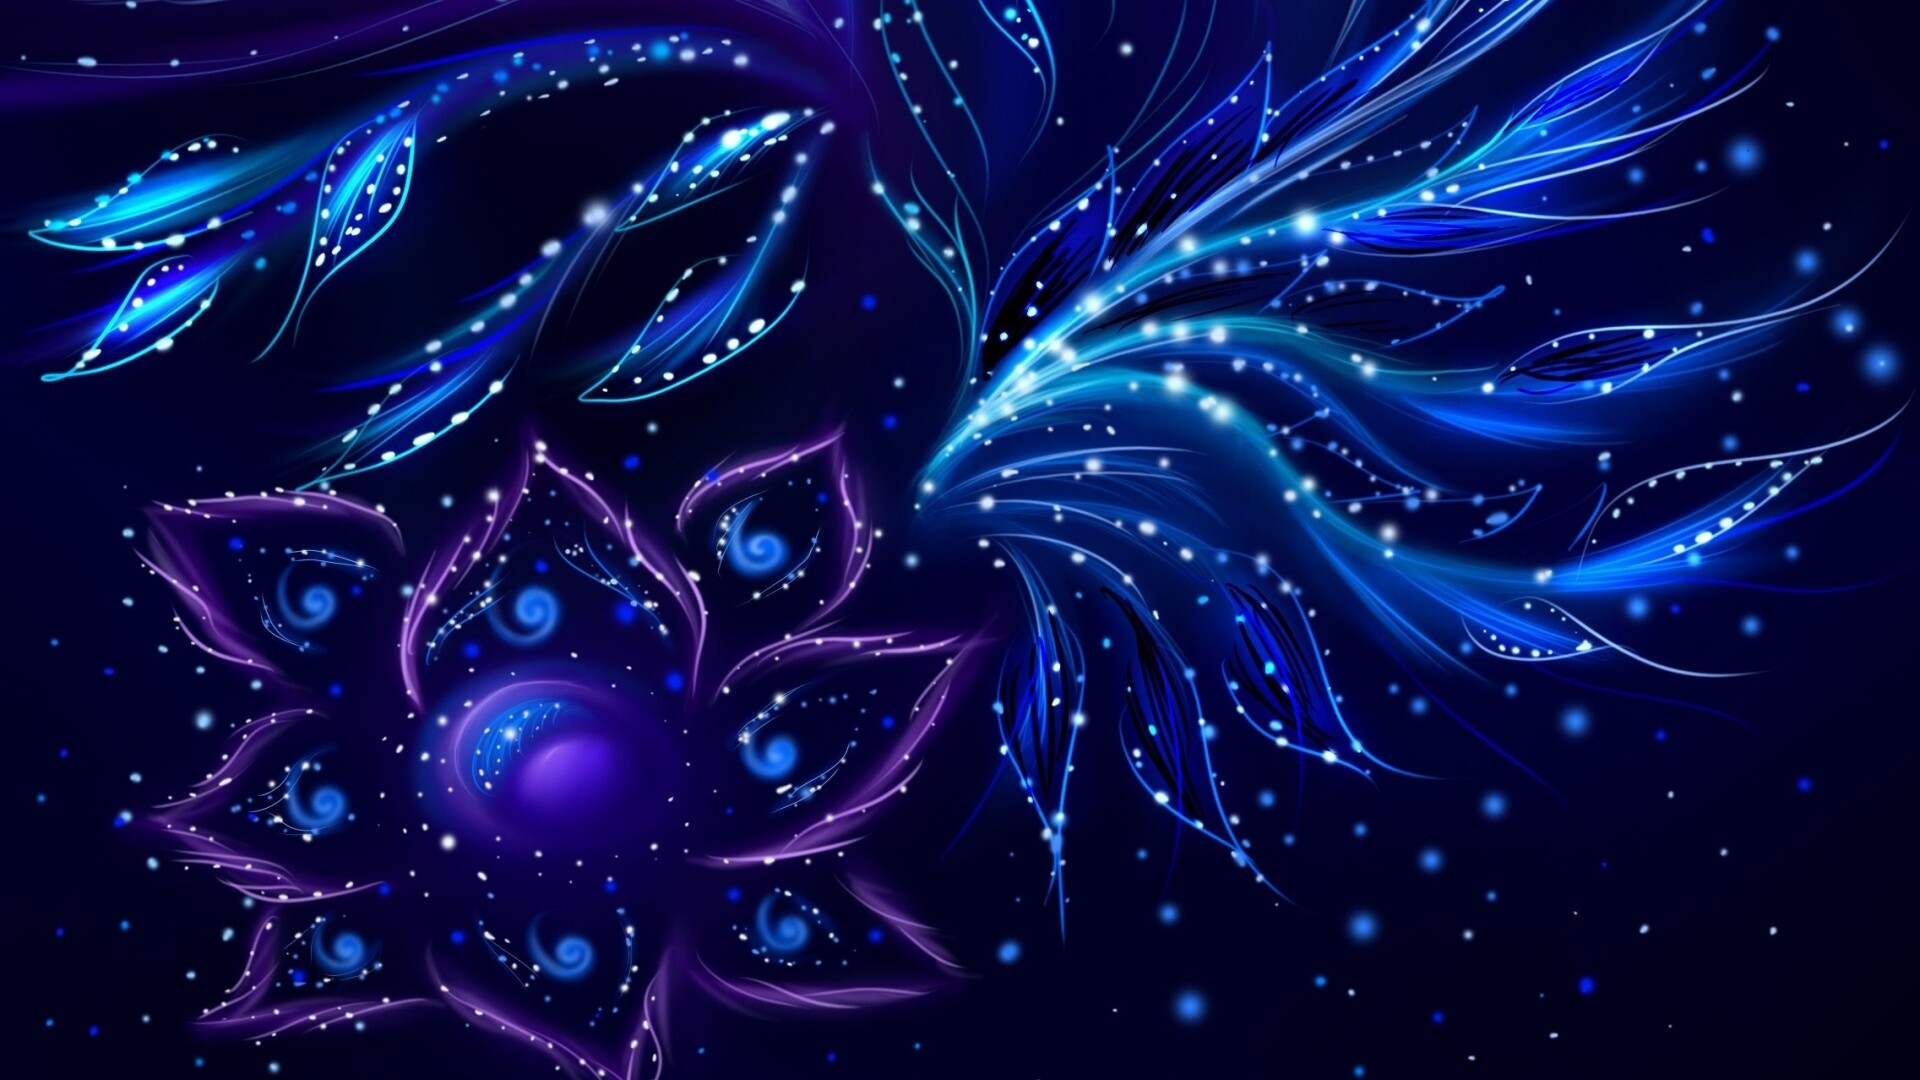 Glow in the Dark: Astronomical objects, Aesthetic, Glowing pattern, Abstract. 1920x1080 Full HD Background.